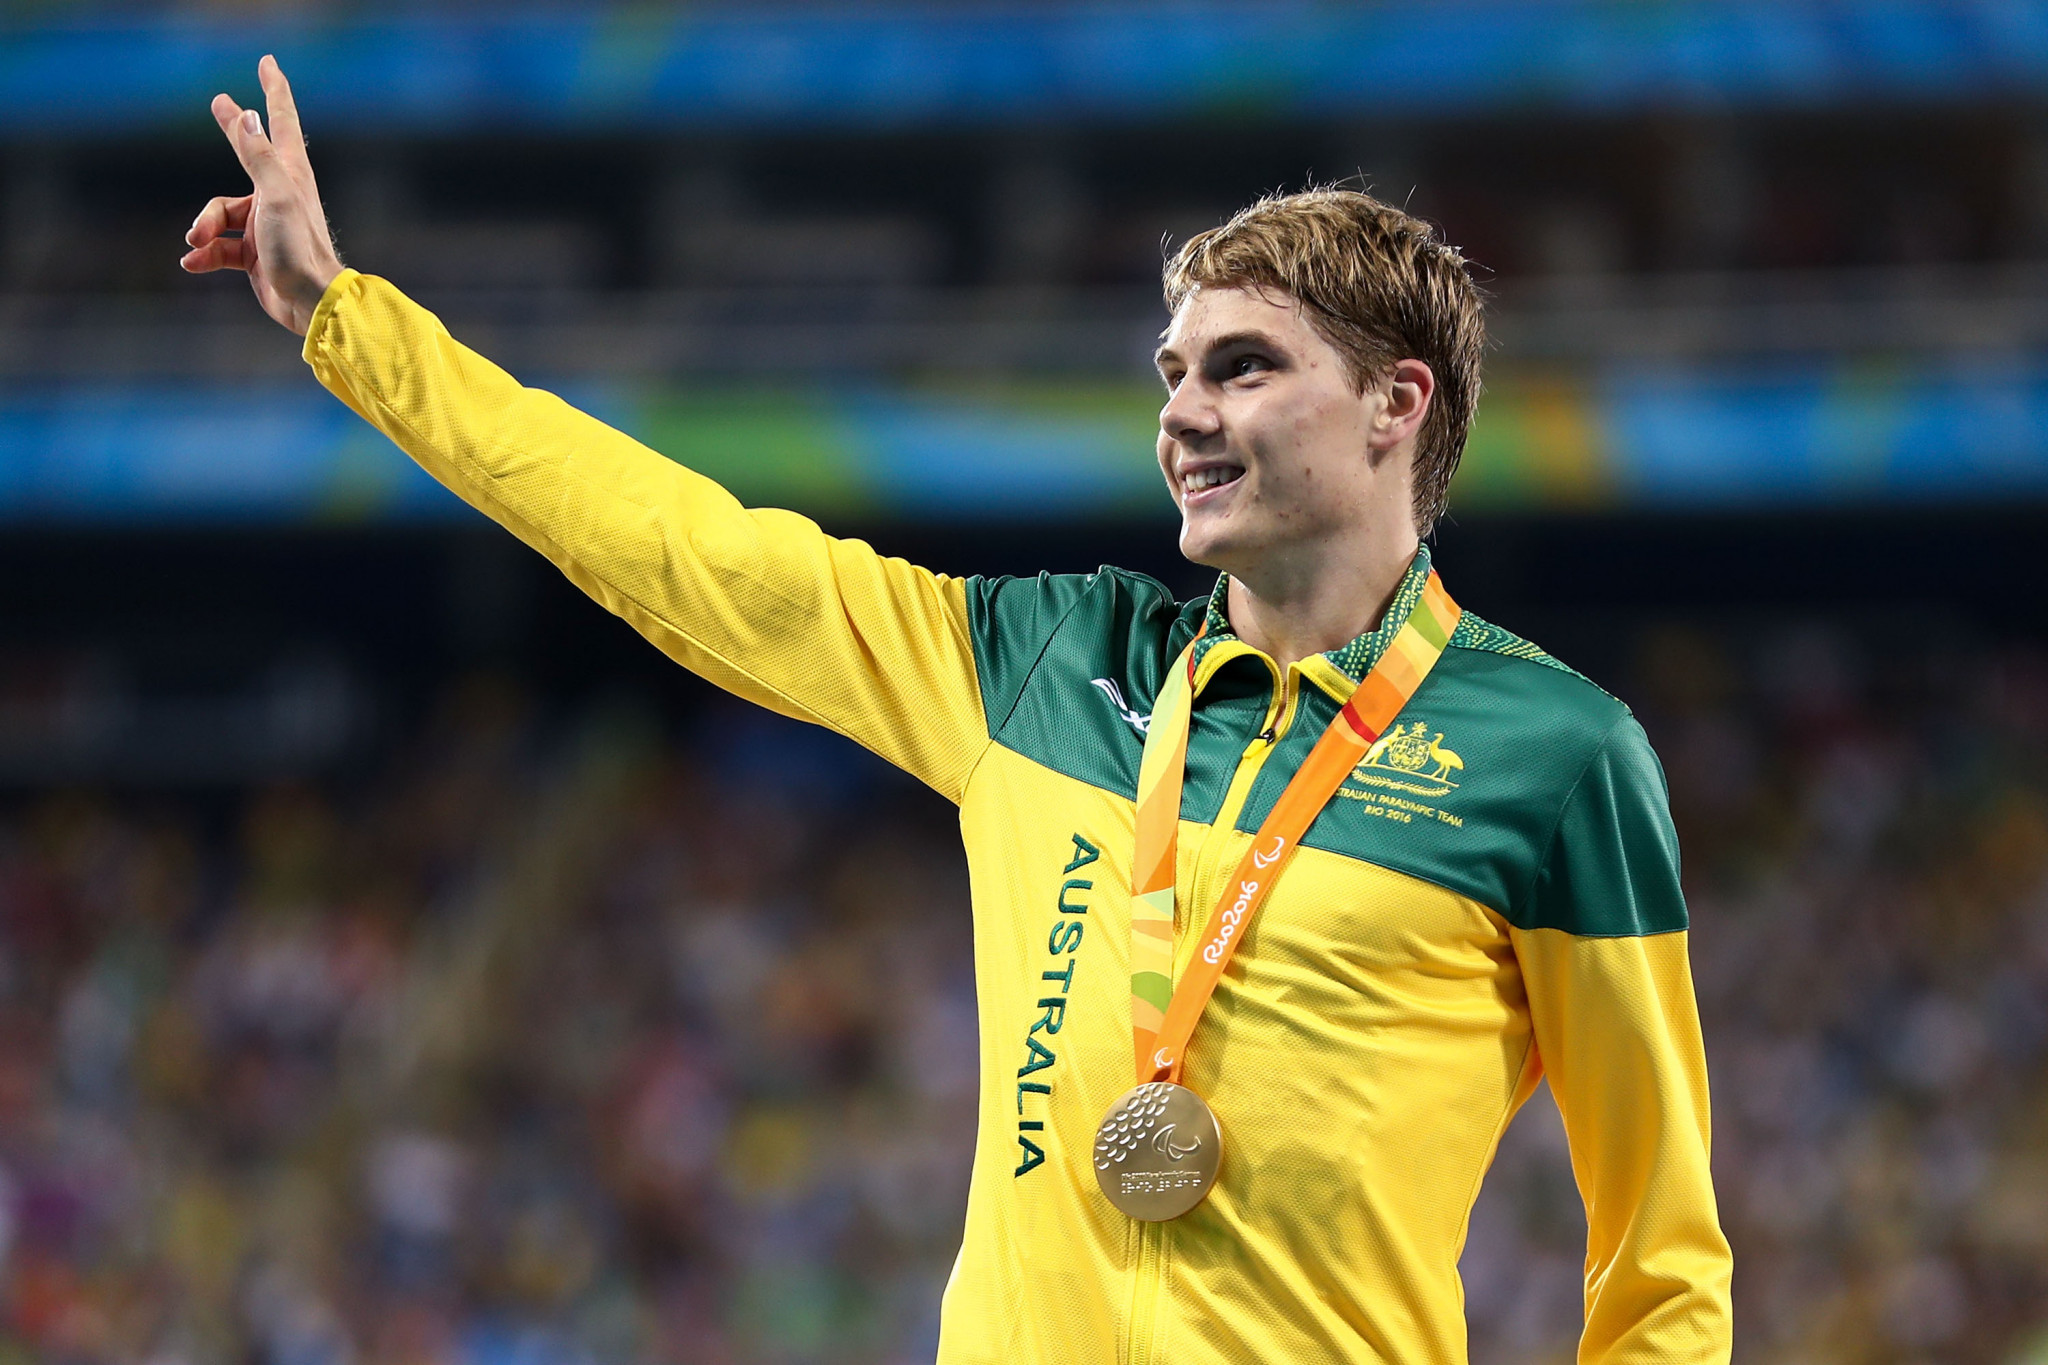 James Turner took one of Australia's 22 Paralympic golds in Rio, their lowest total since 1980 ©Getty Images